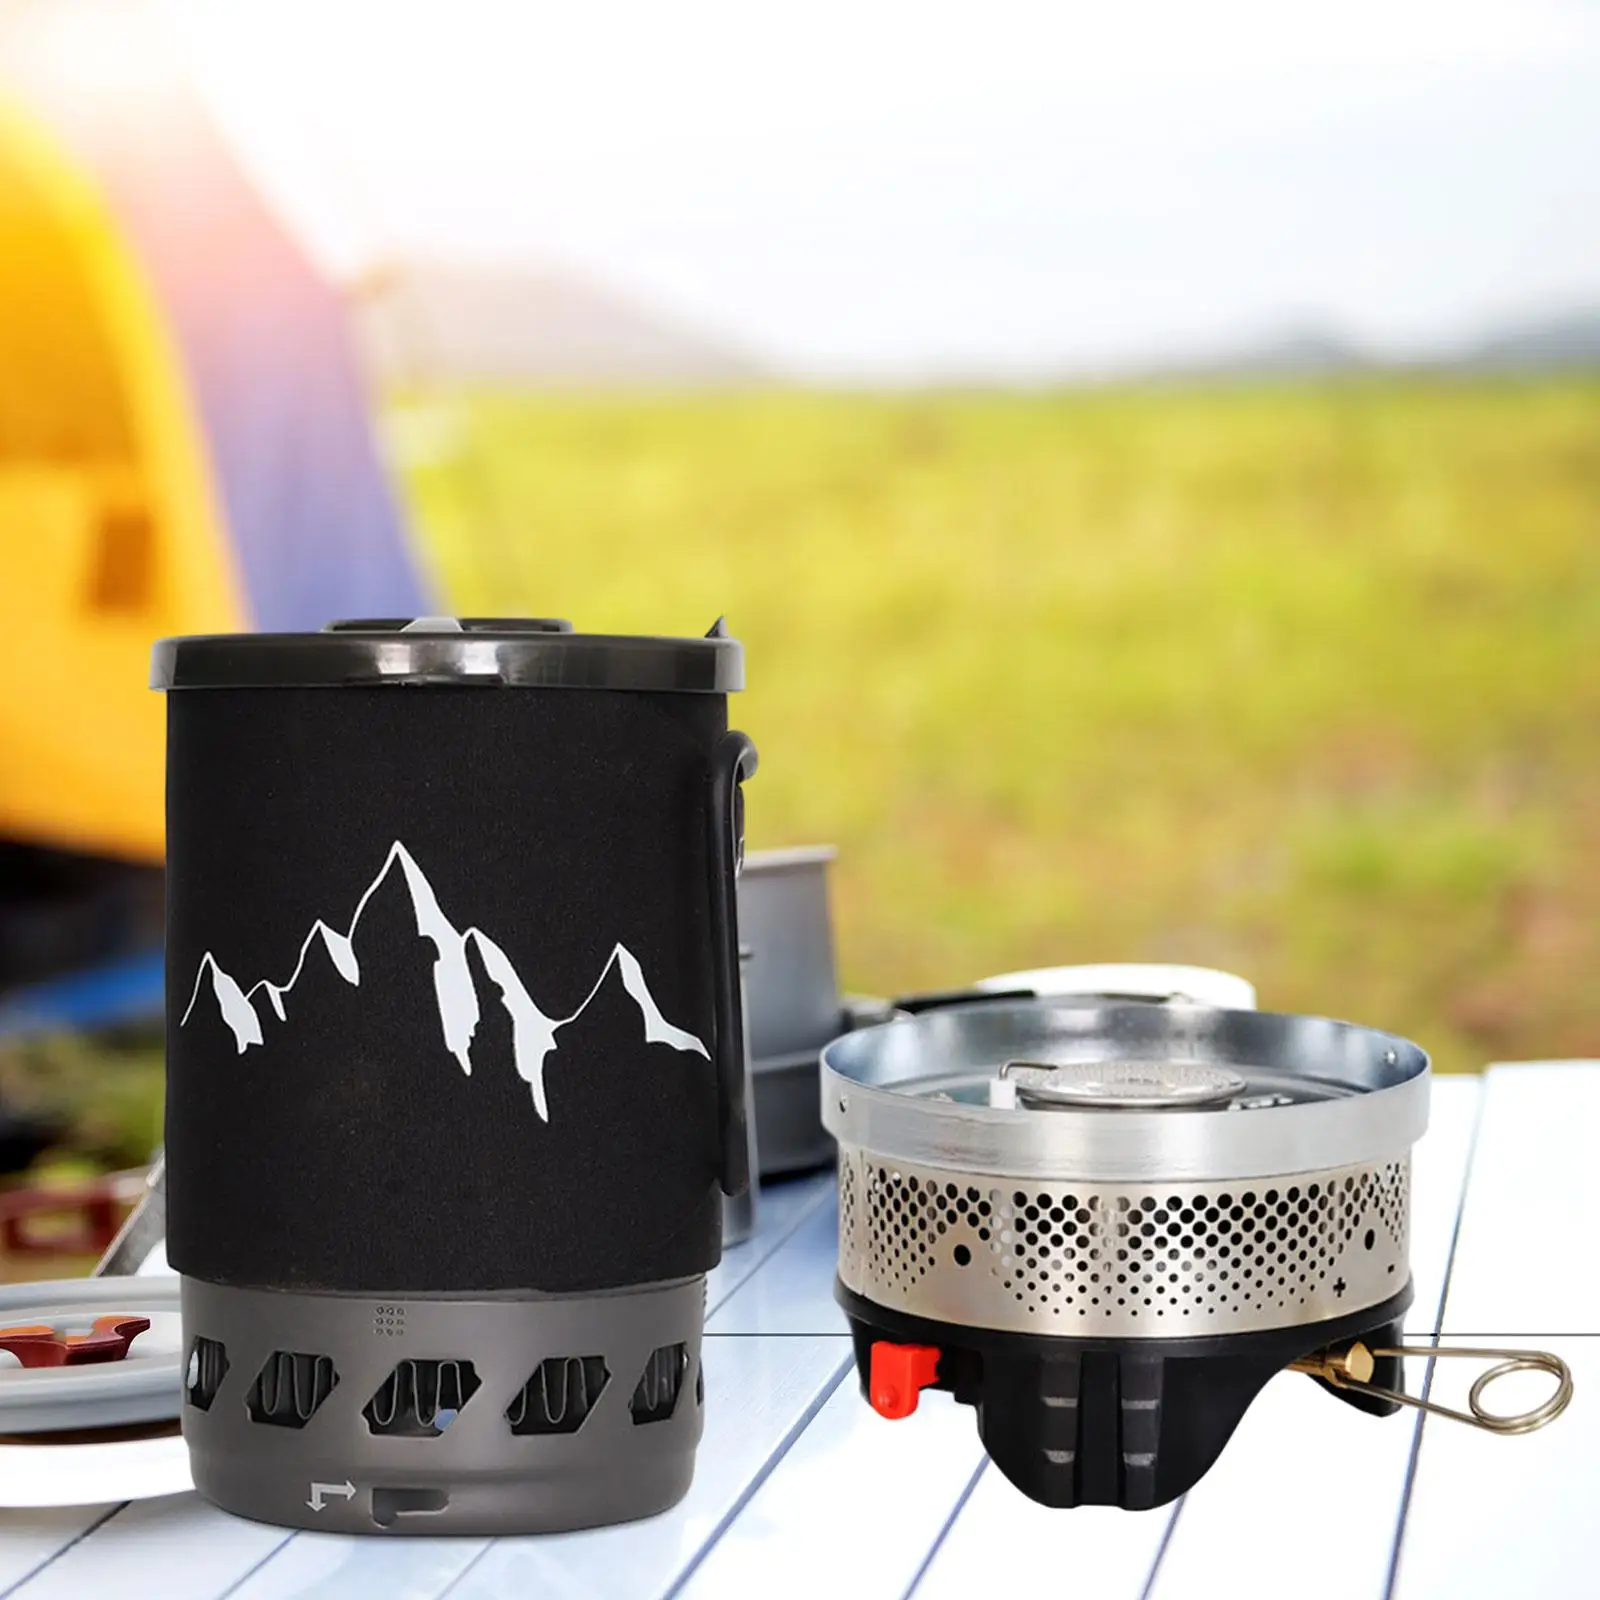 Camping Stove with Carrying Bag Ultralight Outdoor Stove Backpacking Stove Camp Stove Head for Cooking Garden Hiking Picnic BBQ